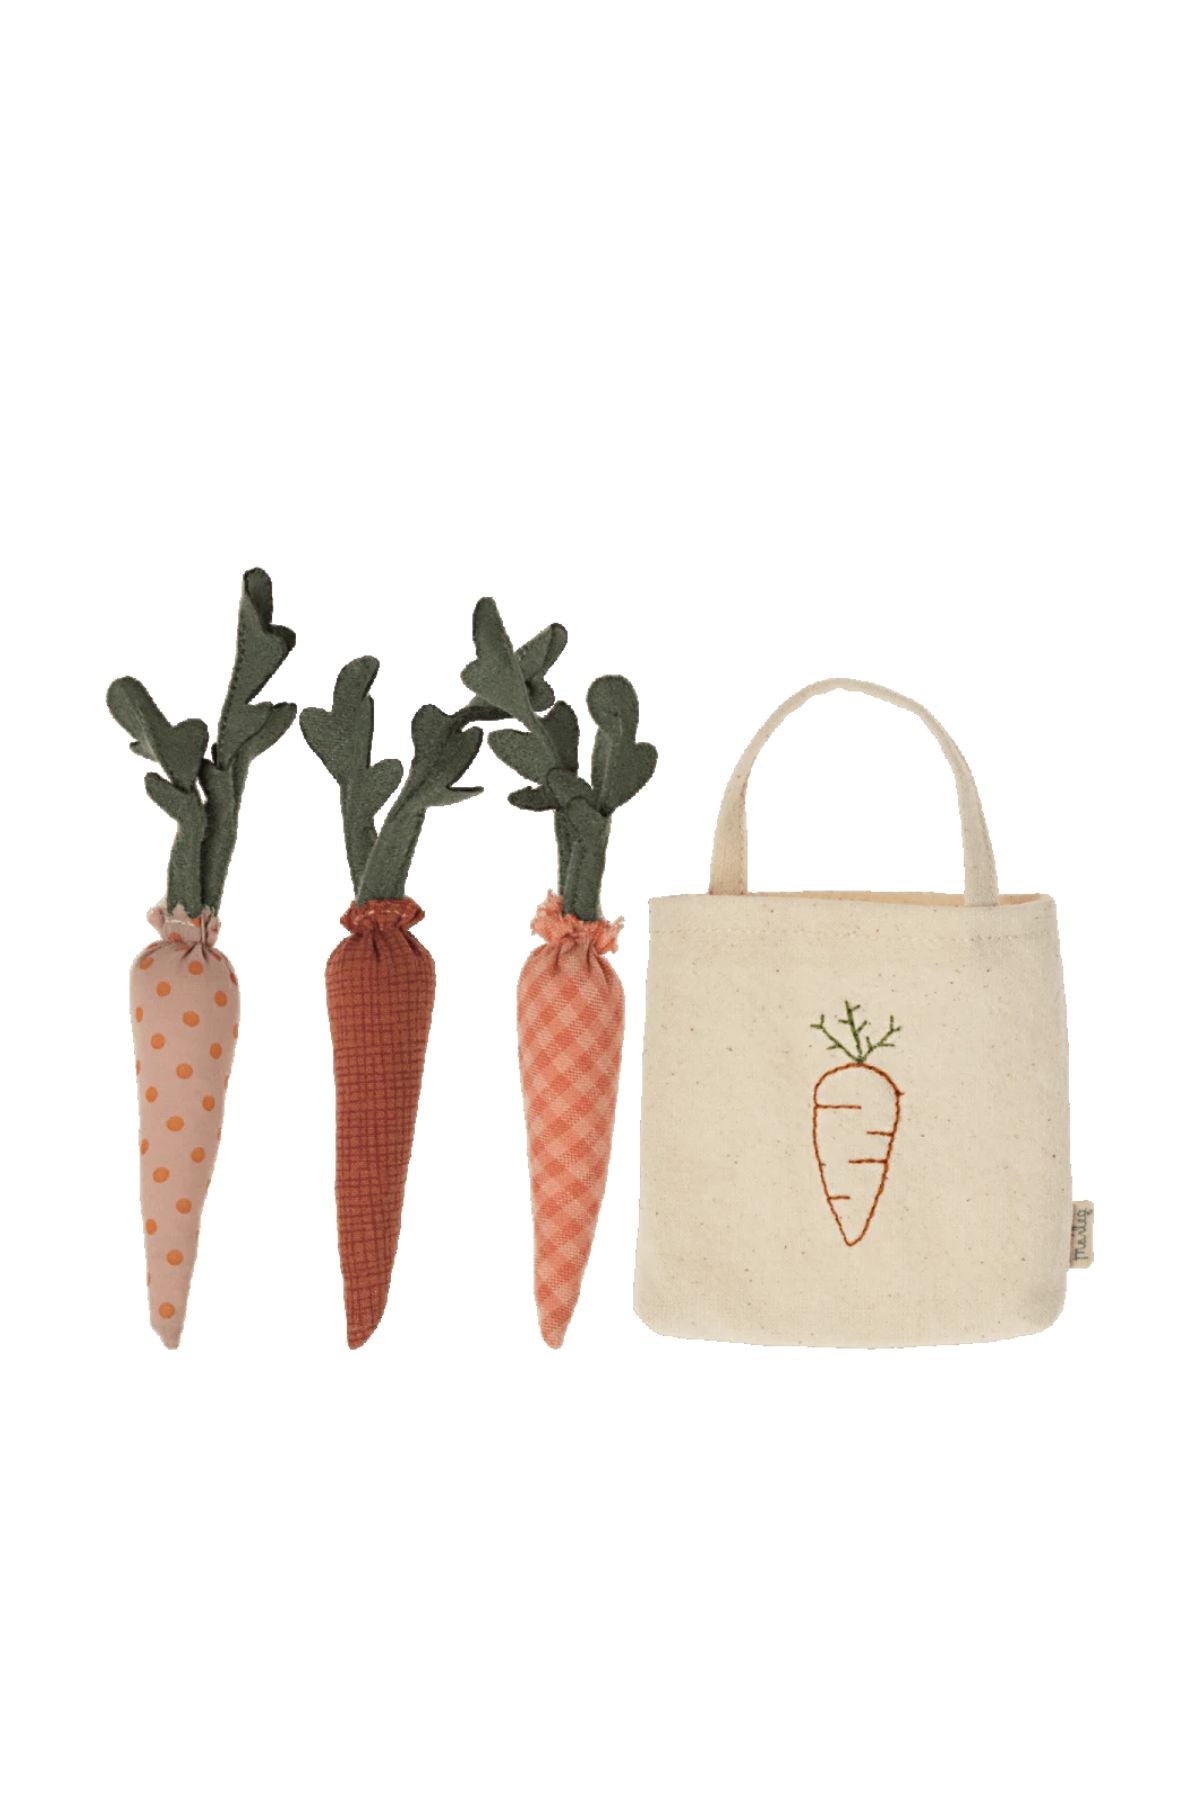 Carrots in Shopping Bag - Fresh Produce for Pretend Play